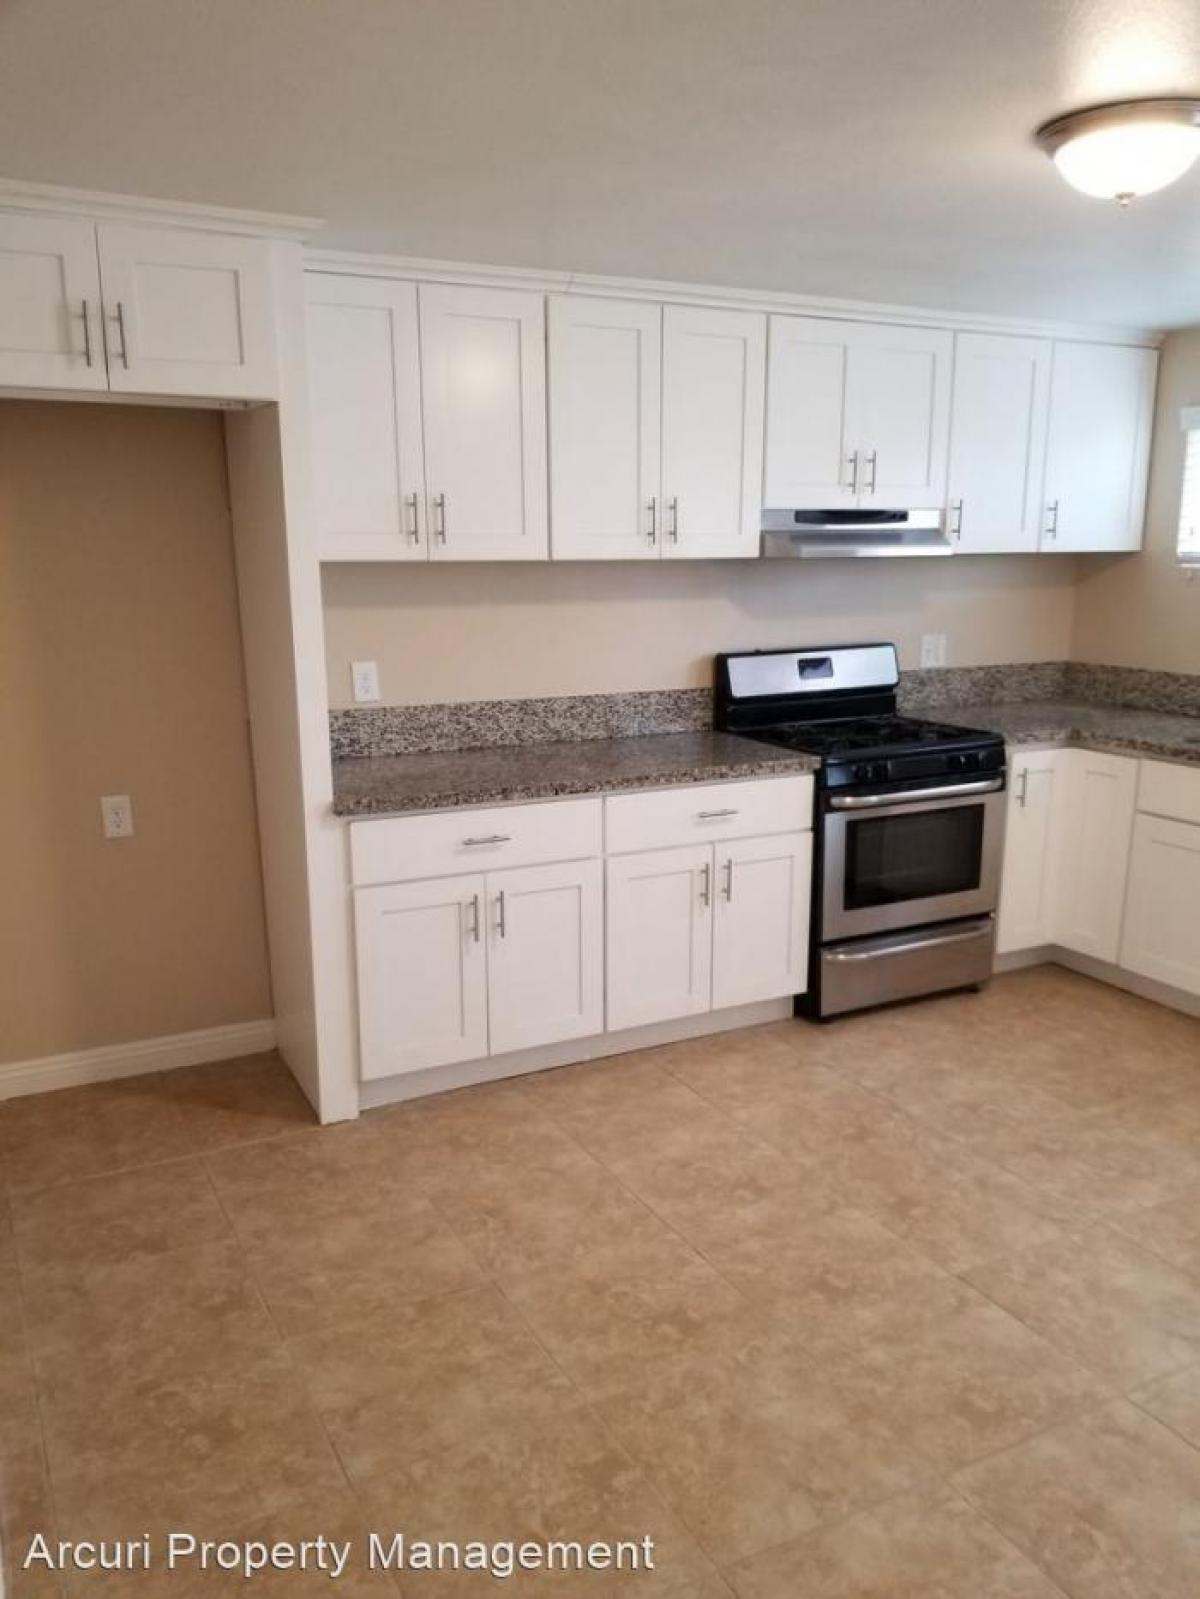 Picture of Apartment For Rent in Anaheim, California, United States